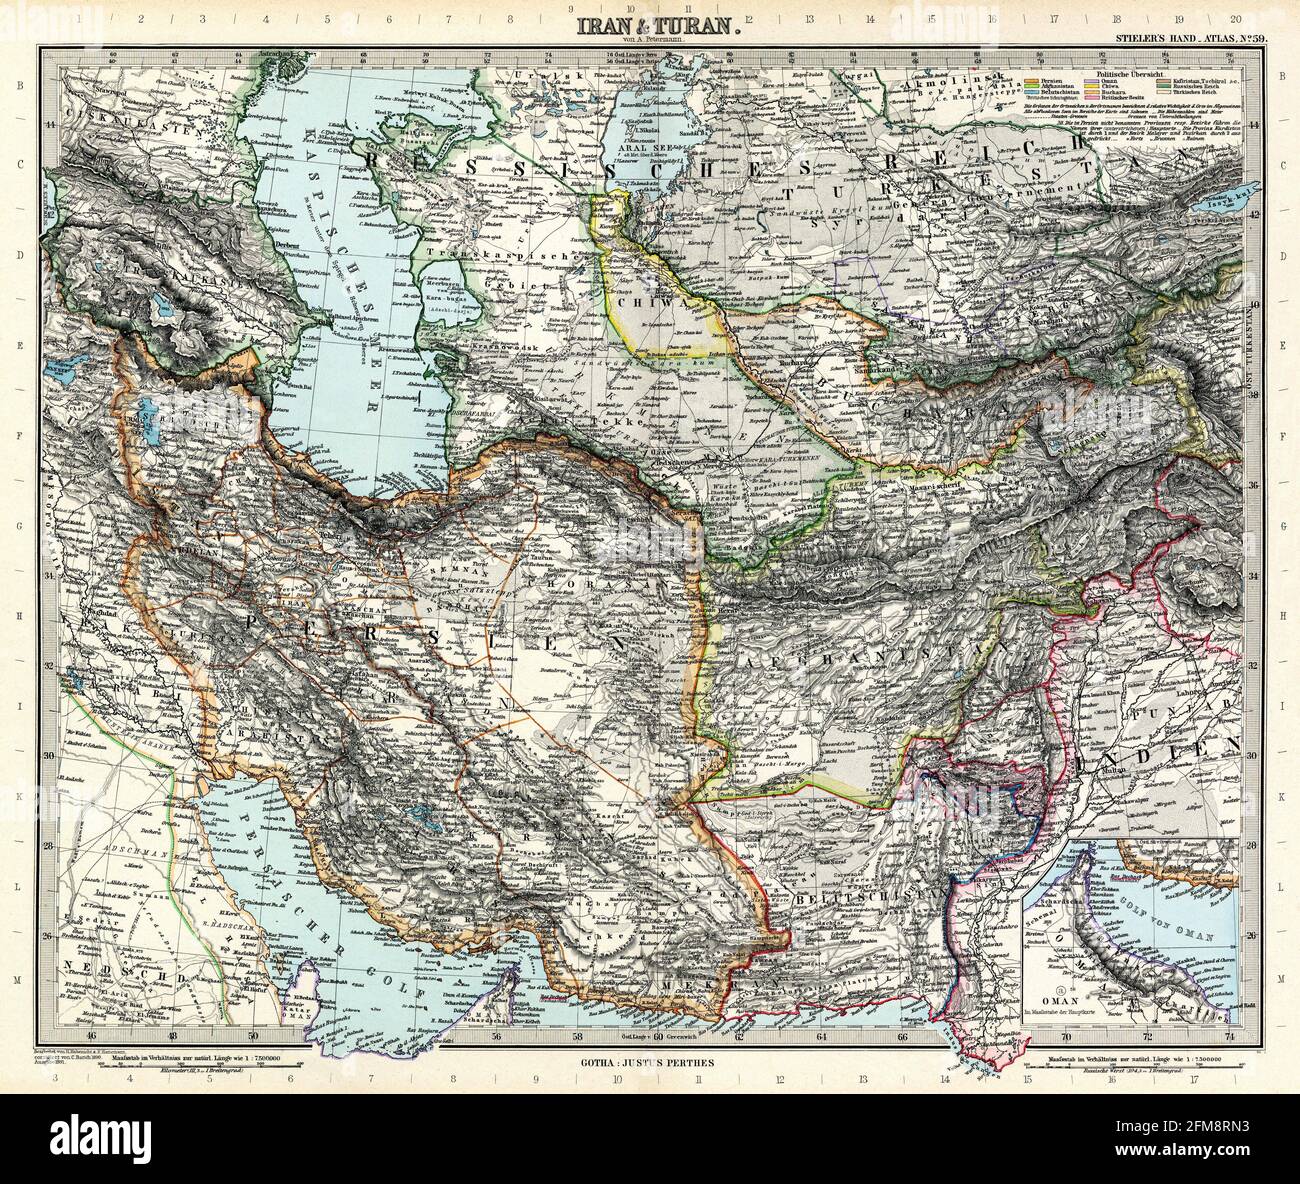 Vintage copper engraved map of Iran from 19th century. All maps are beautifully colored and illustrated showing the world at the time. Stock Photo